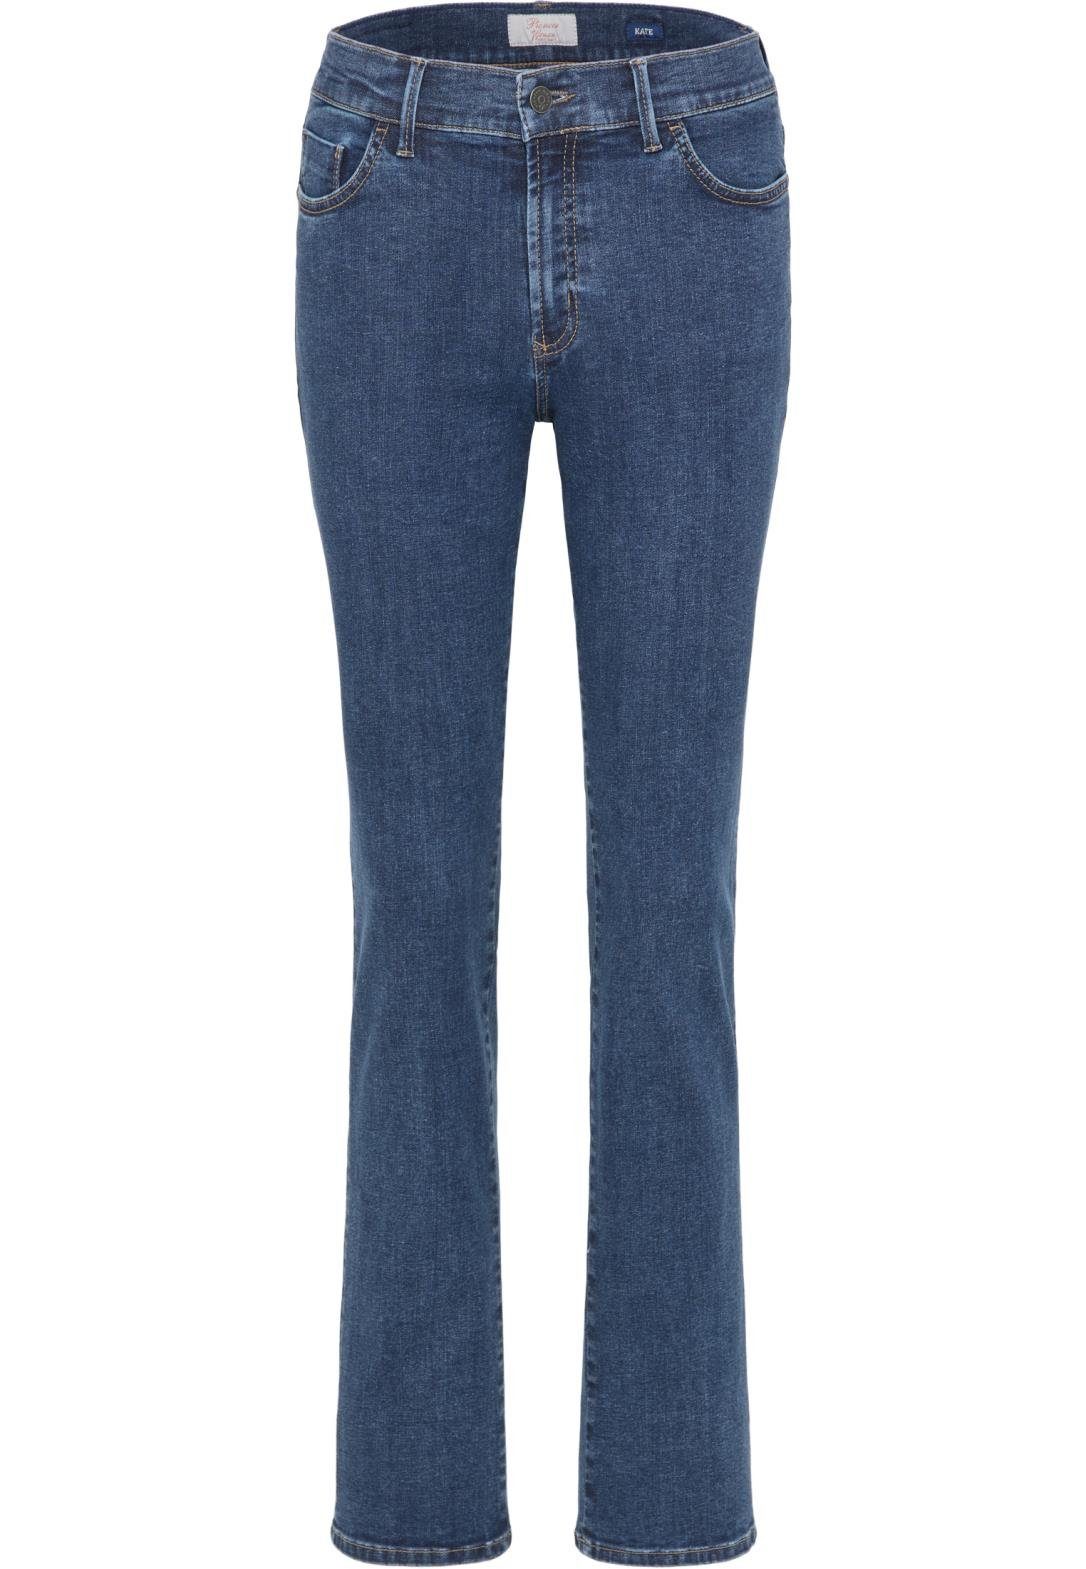 - 3213 PIONEER mid Stretch-Jeans Pioneer 4010.05 KATE Jeans blue Authentic POWERSTRETCH